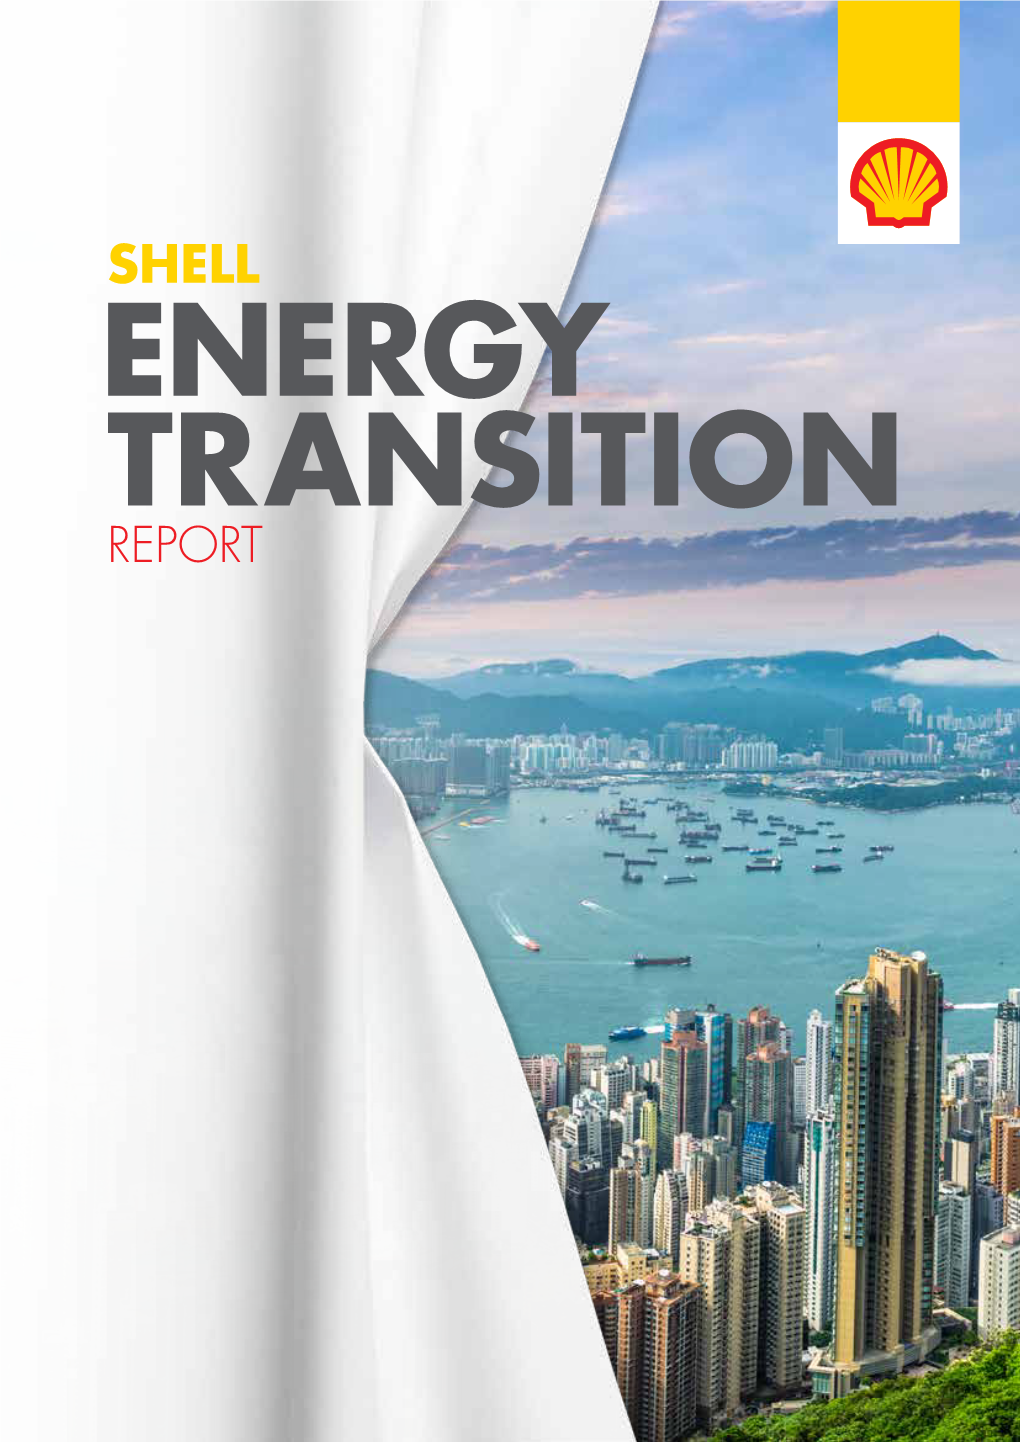 Shell Energy Transition Report